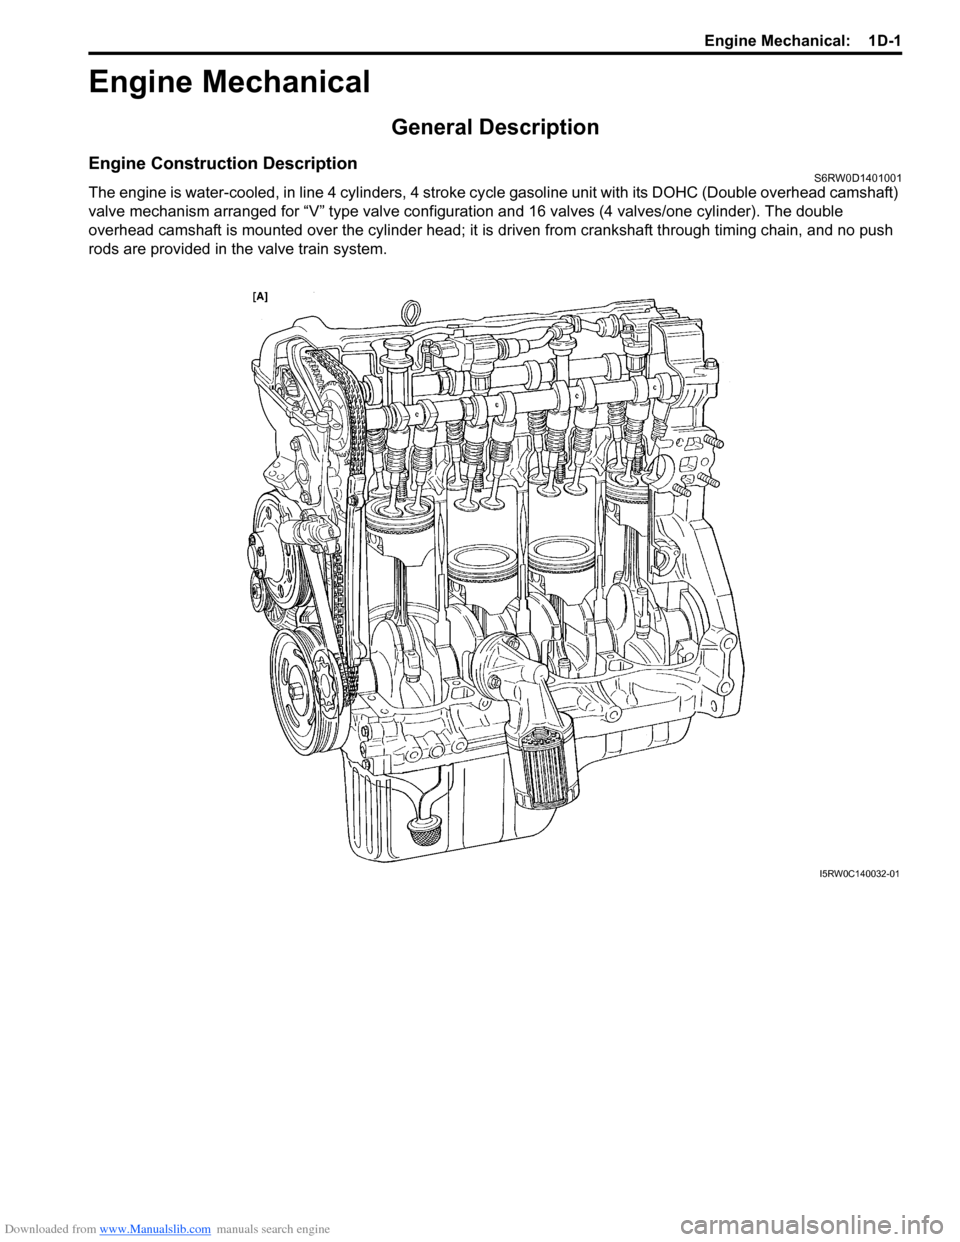 SUZUKI SX4 2006 1.G Service Workshop Manual Downloaded from www.Manualslib.com manuals search engine Engine Mechanical:  1D-1
Engine
Engine Mechanical
General Description
Engine Construction DescriptionS6RW0D1401001
The engine is water-cooled, 